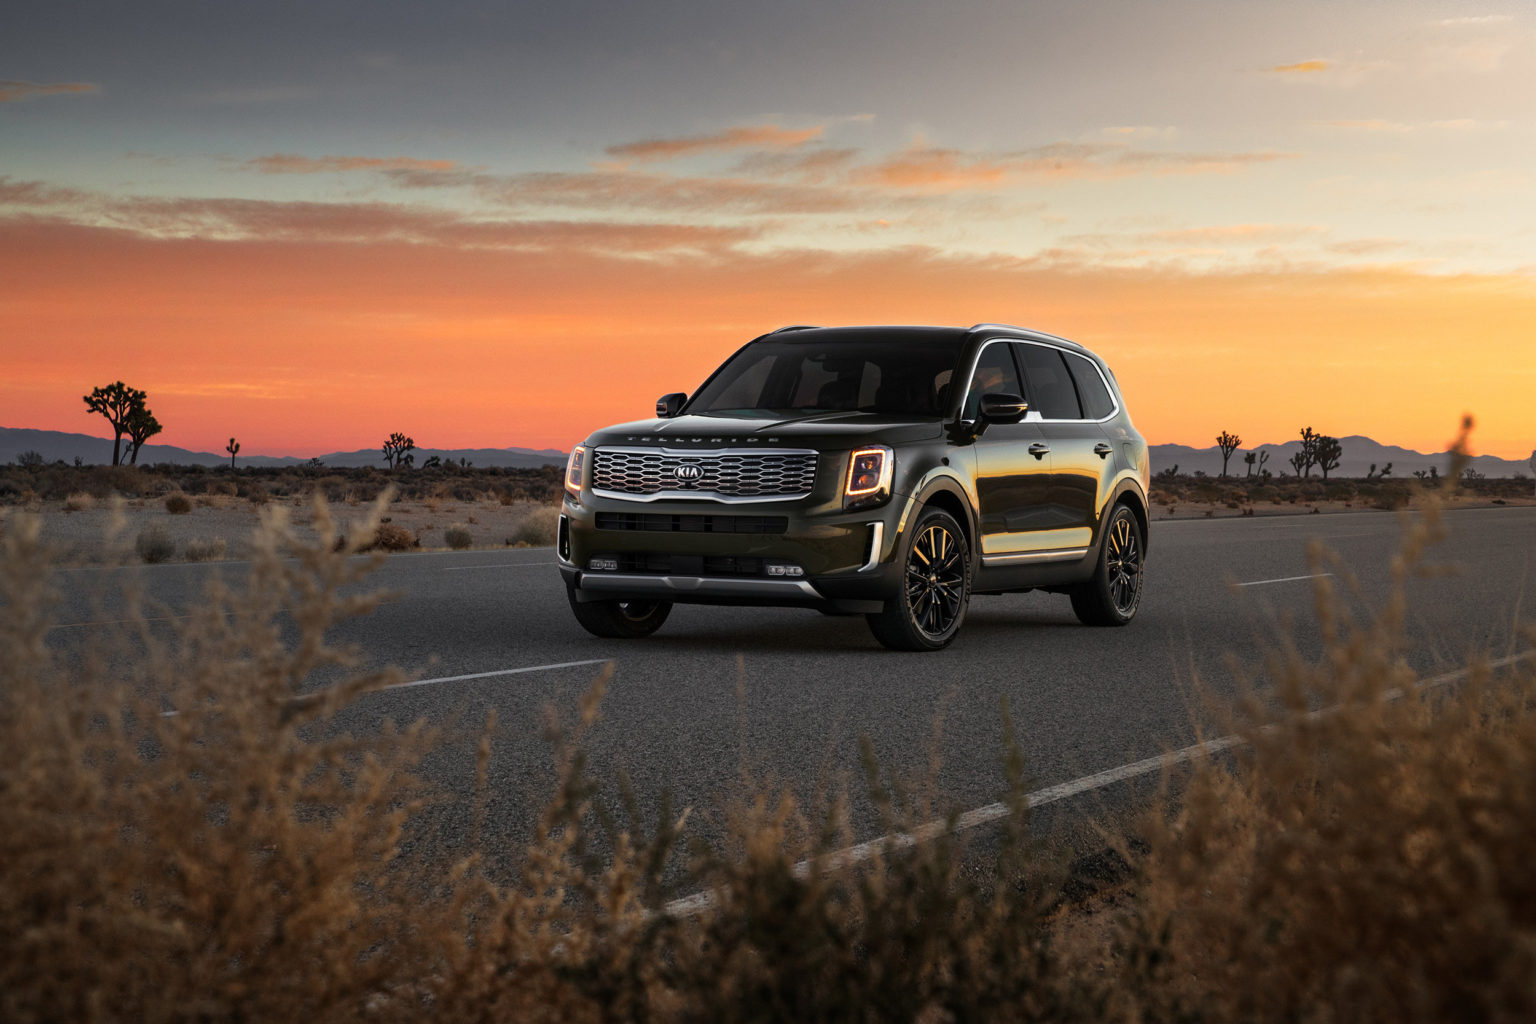 The Kia Telluride is just one of the models Americans are most emotionally attached to.